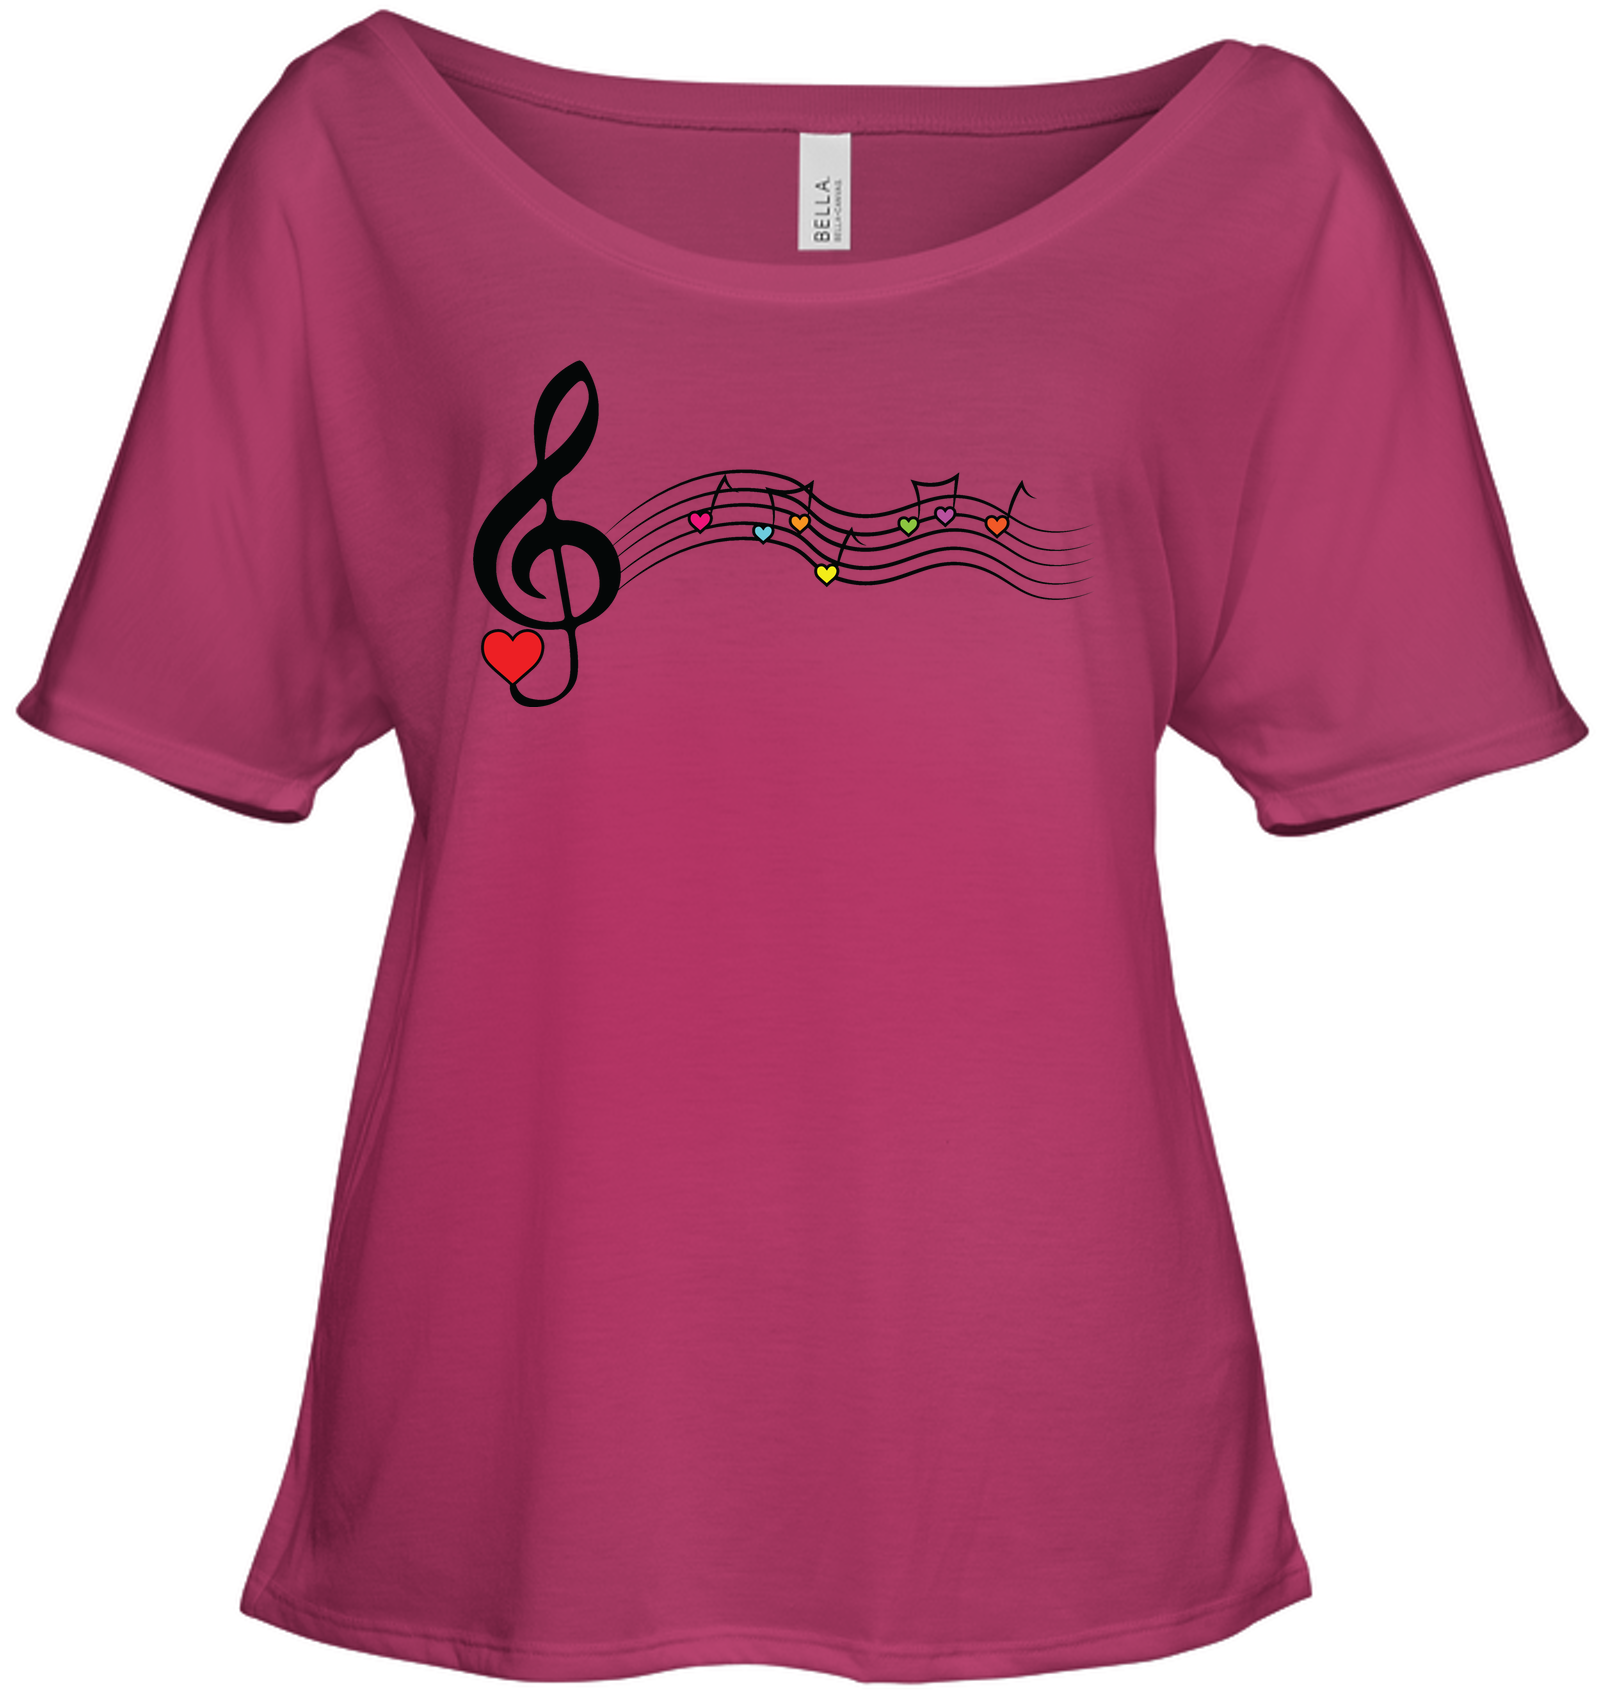 Musical Waves, Heart Notes and Colors - Bella + Canvas Women's Slouchy Tee